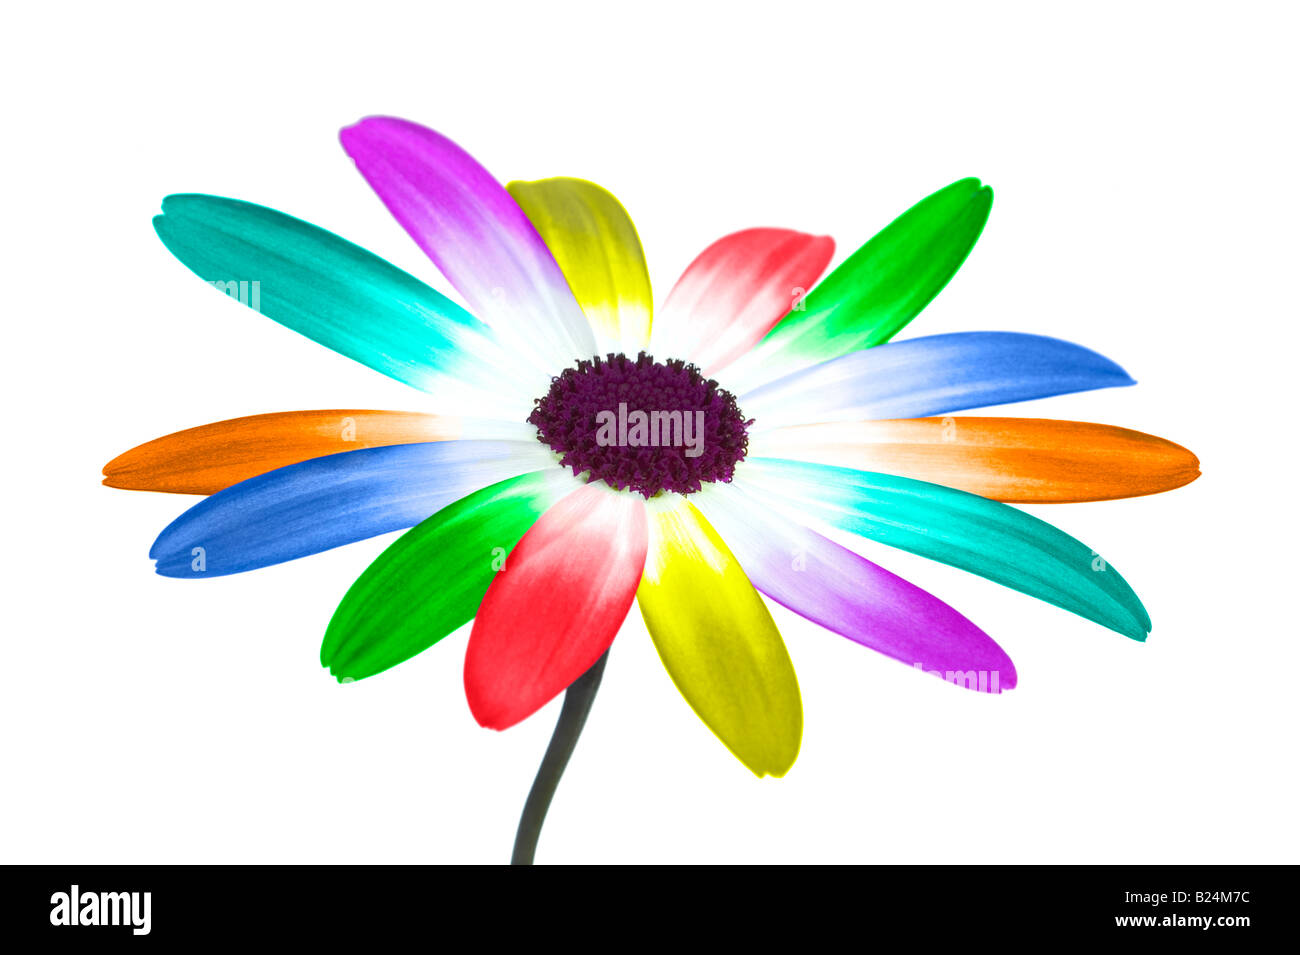 Abstract image of a daisy with its petals in the colours of the rainbow Stock Photo